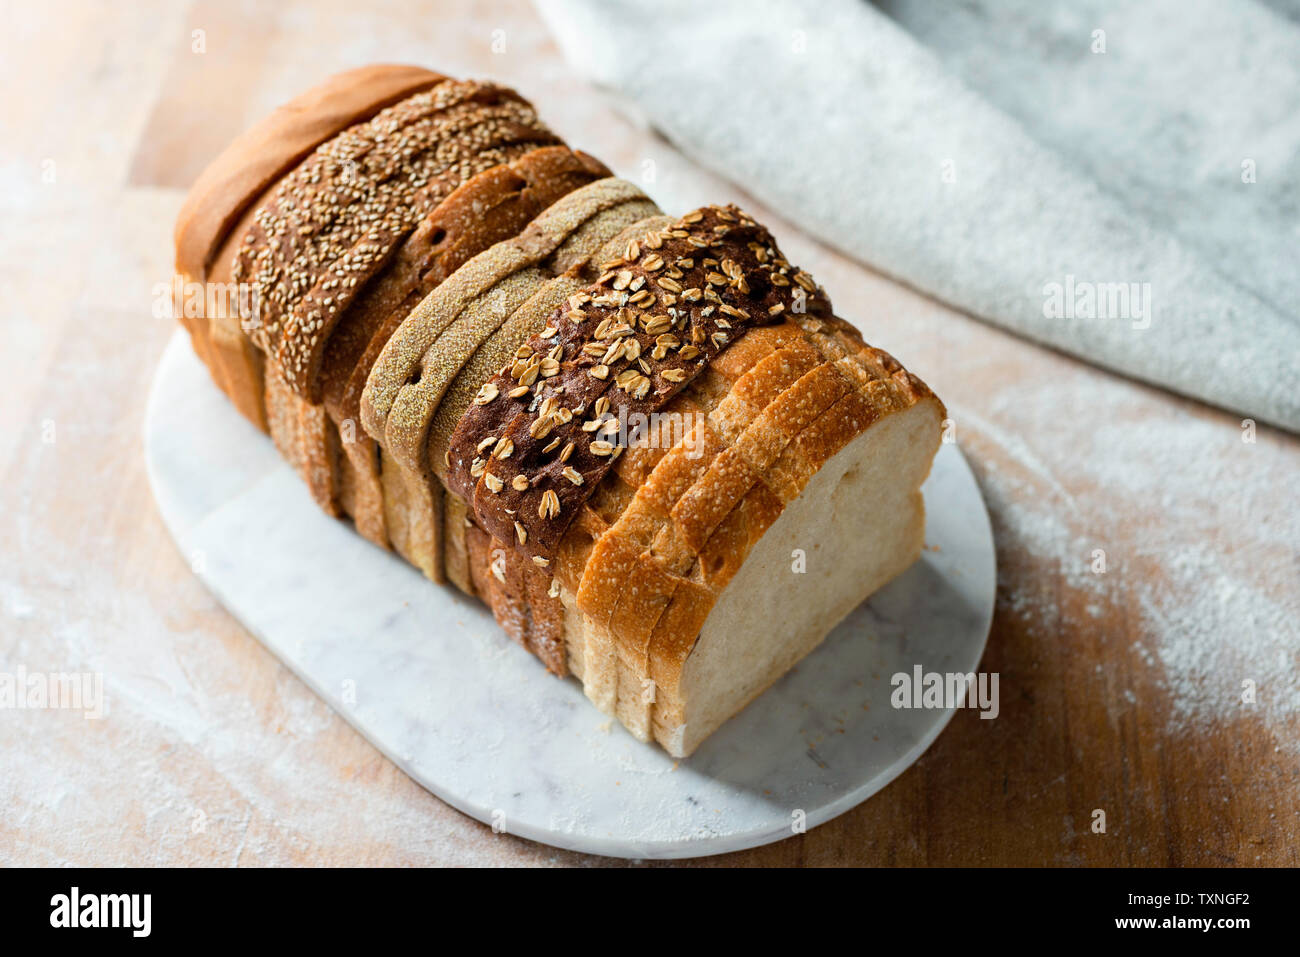 Sliced loaf made up of variety of white and wholemeal slices on cutting board, high angle view Stock Photo